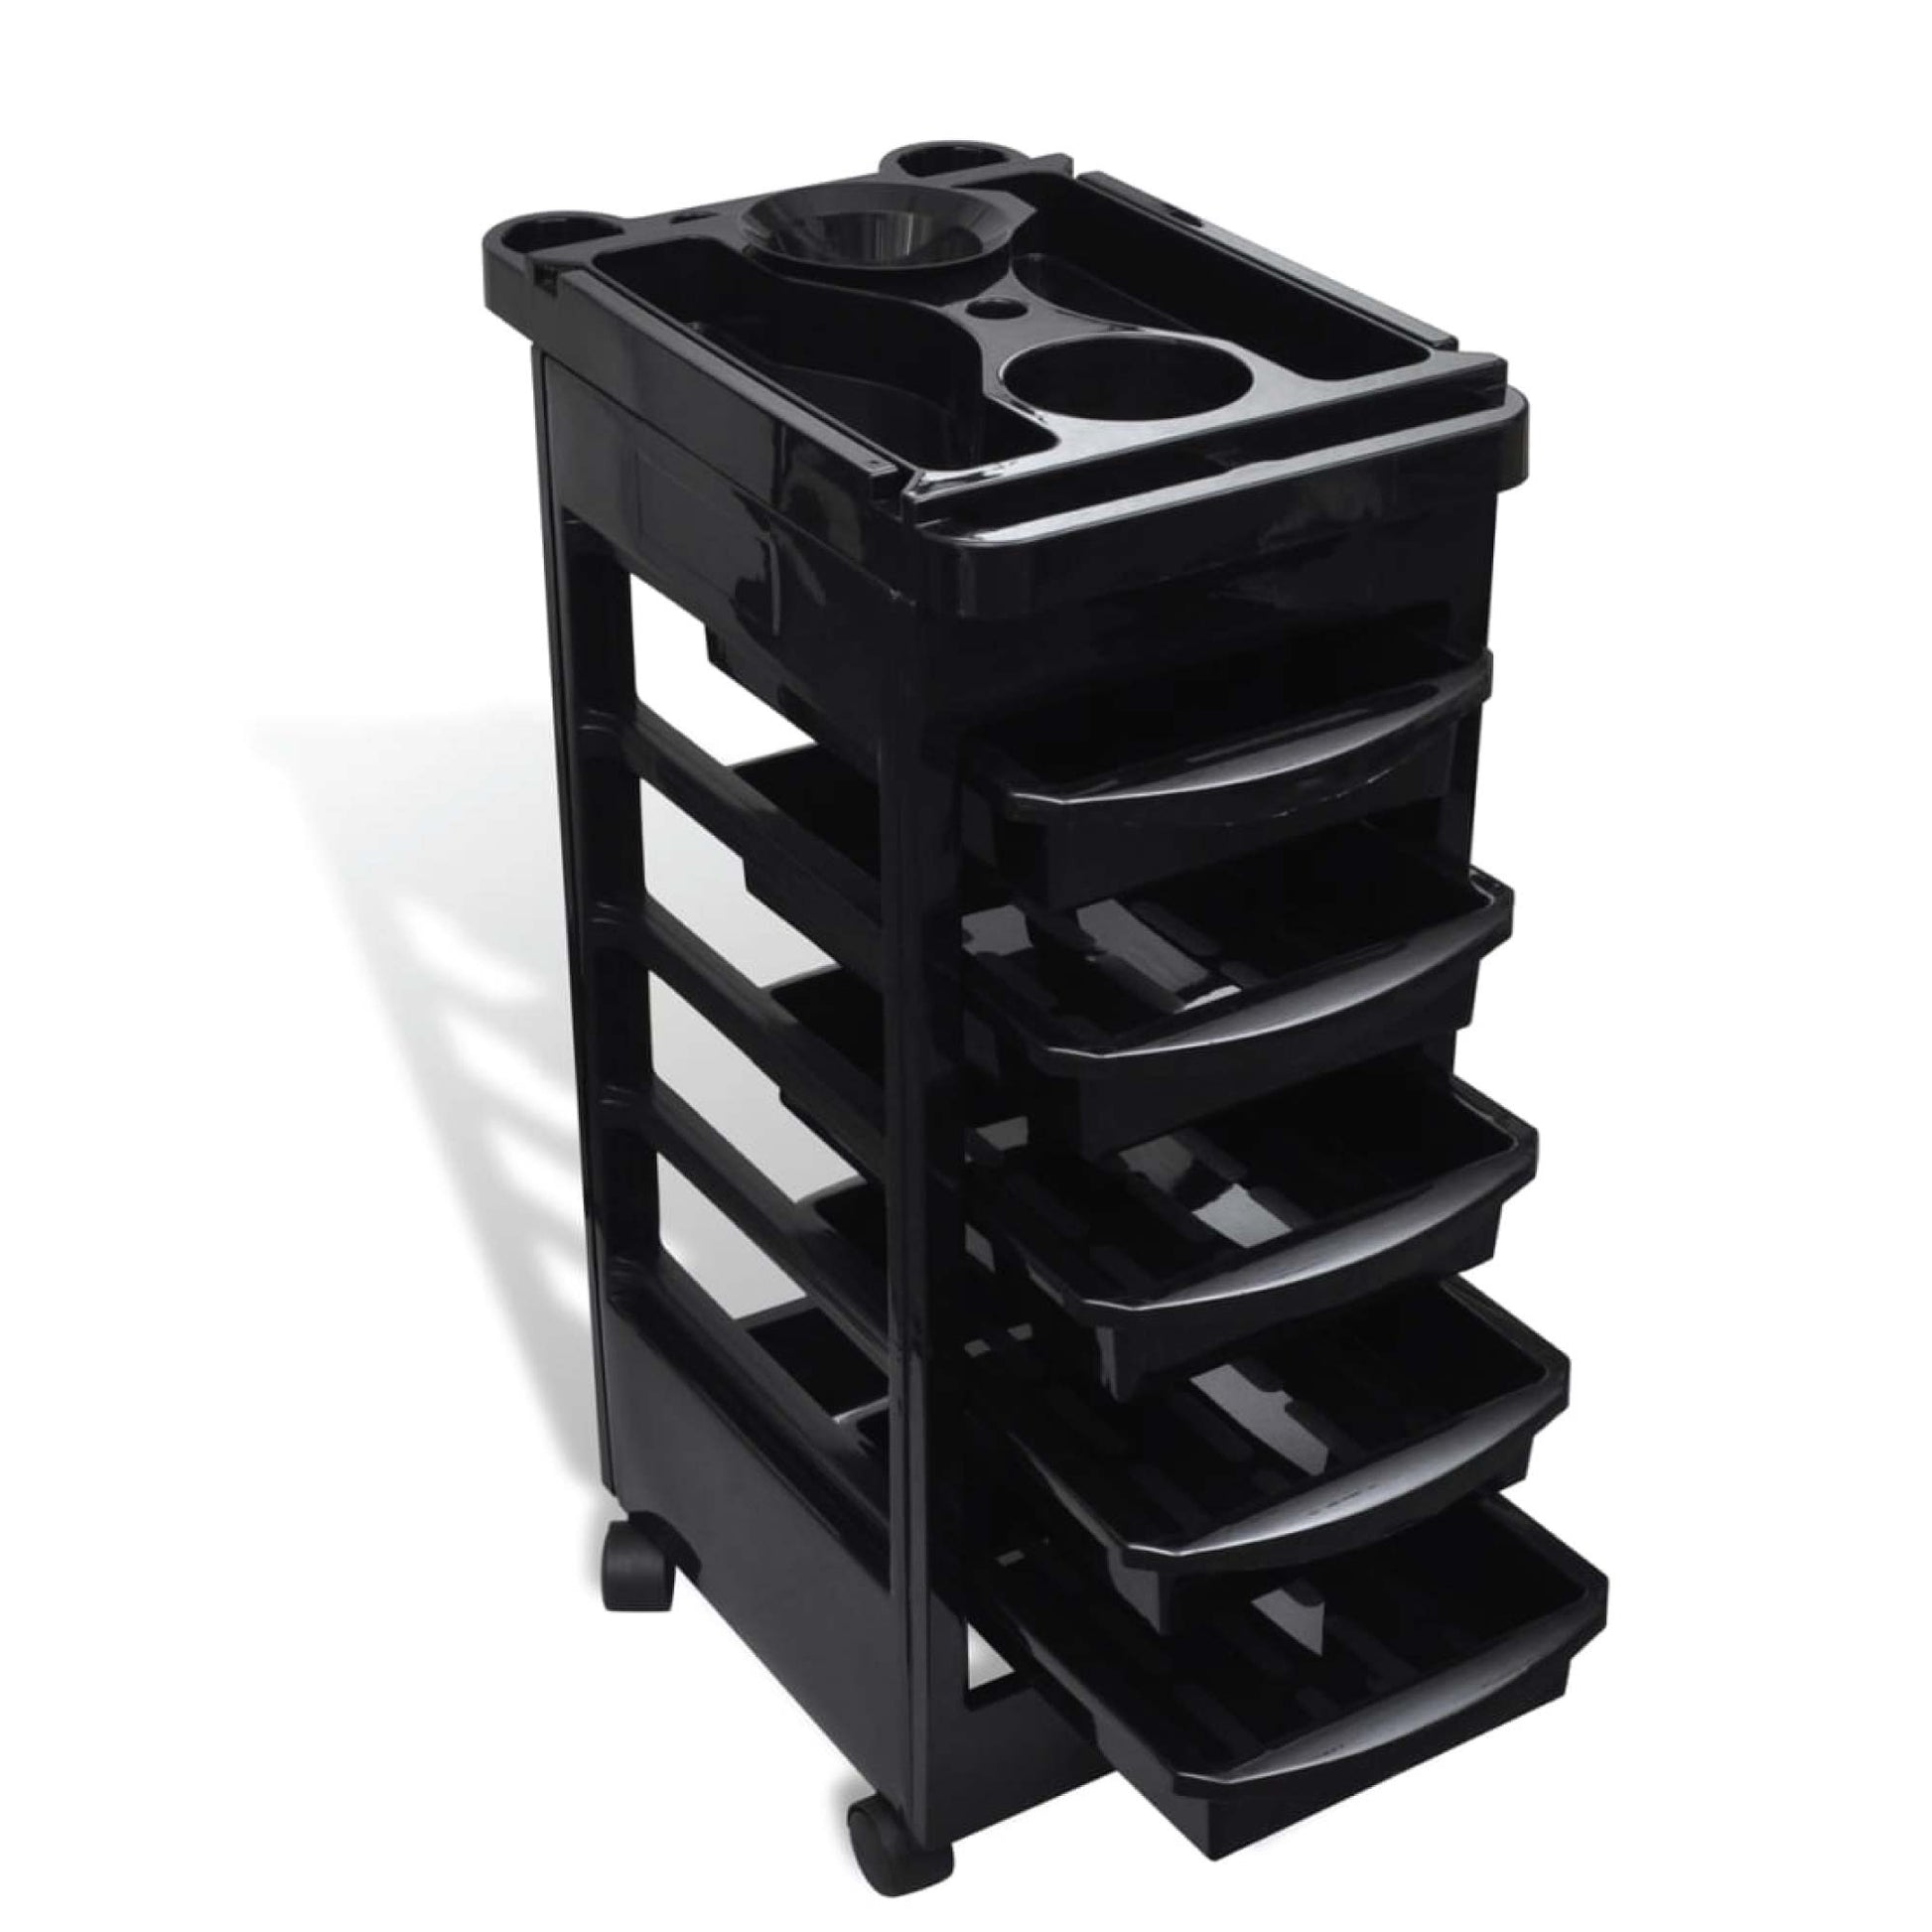 6 Tier Hairdressing Trolley Black 82x49x32cm Salon Hair Colouring Rolling Cart